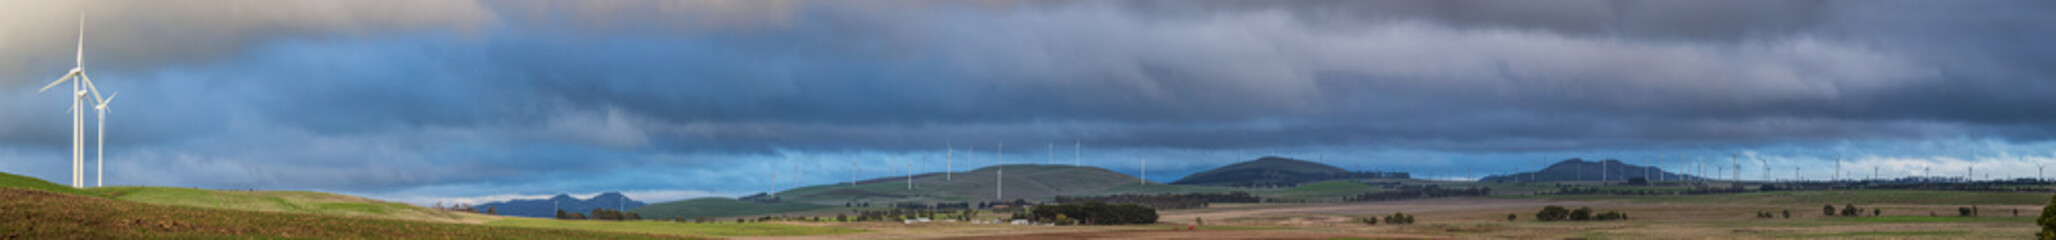 Panoramic view of wind turbines at a wind farm in Victoria Australia